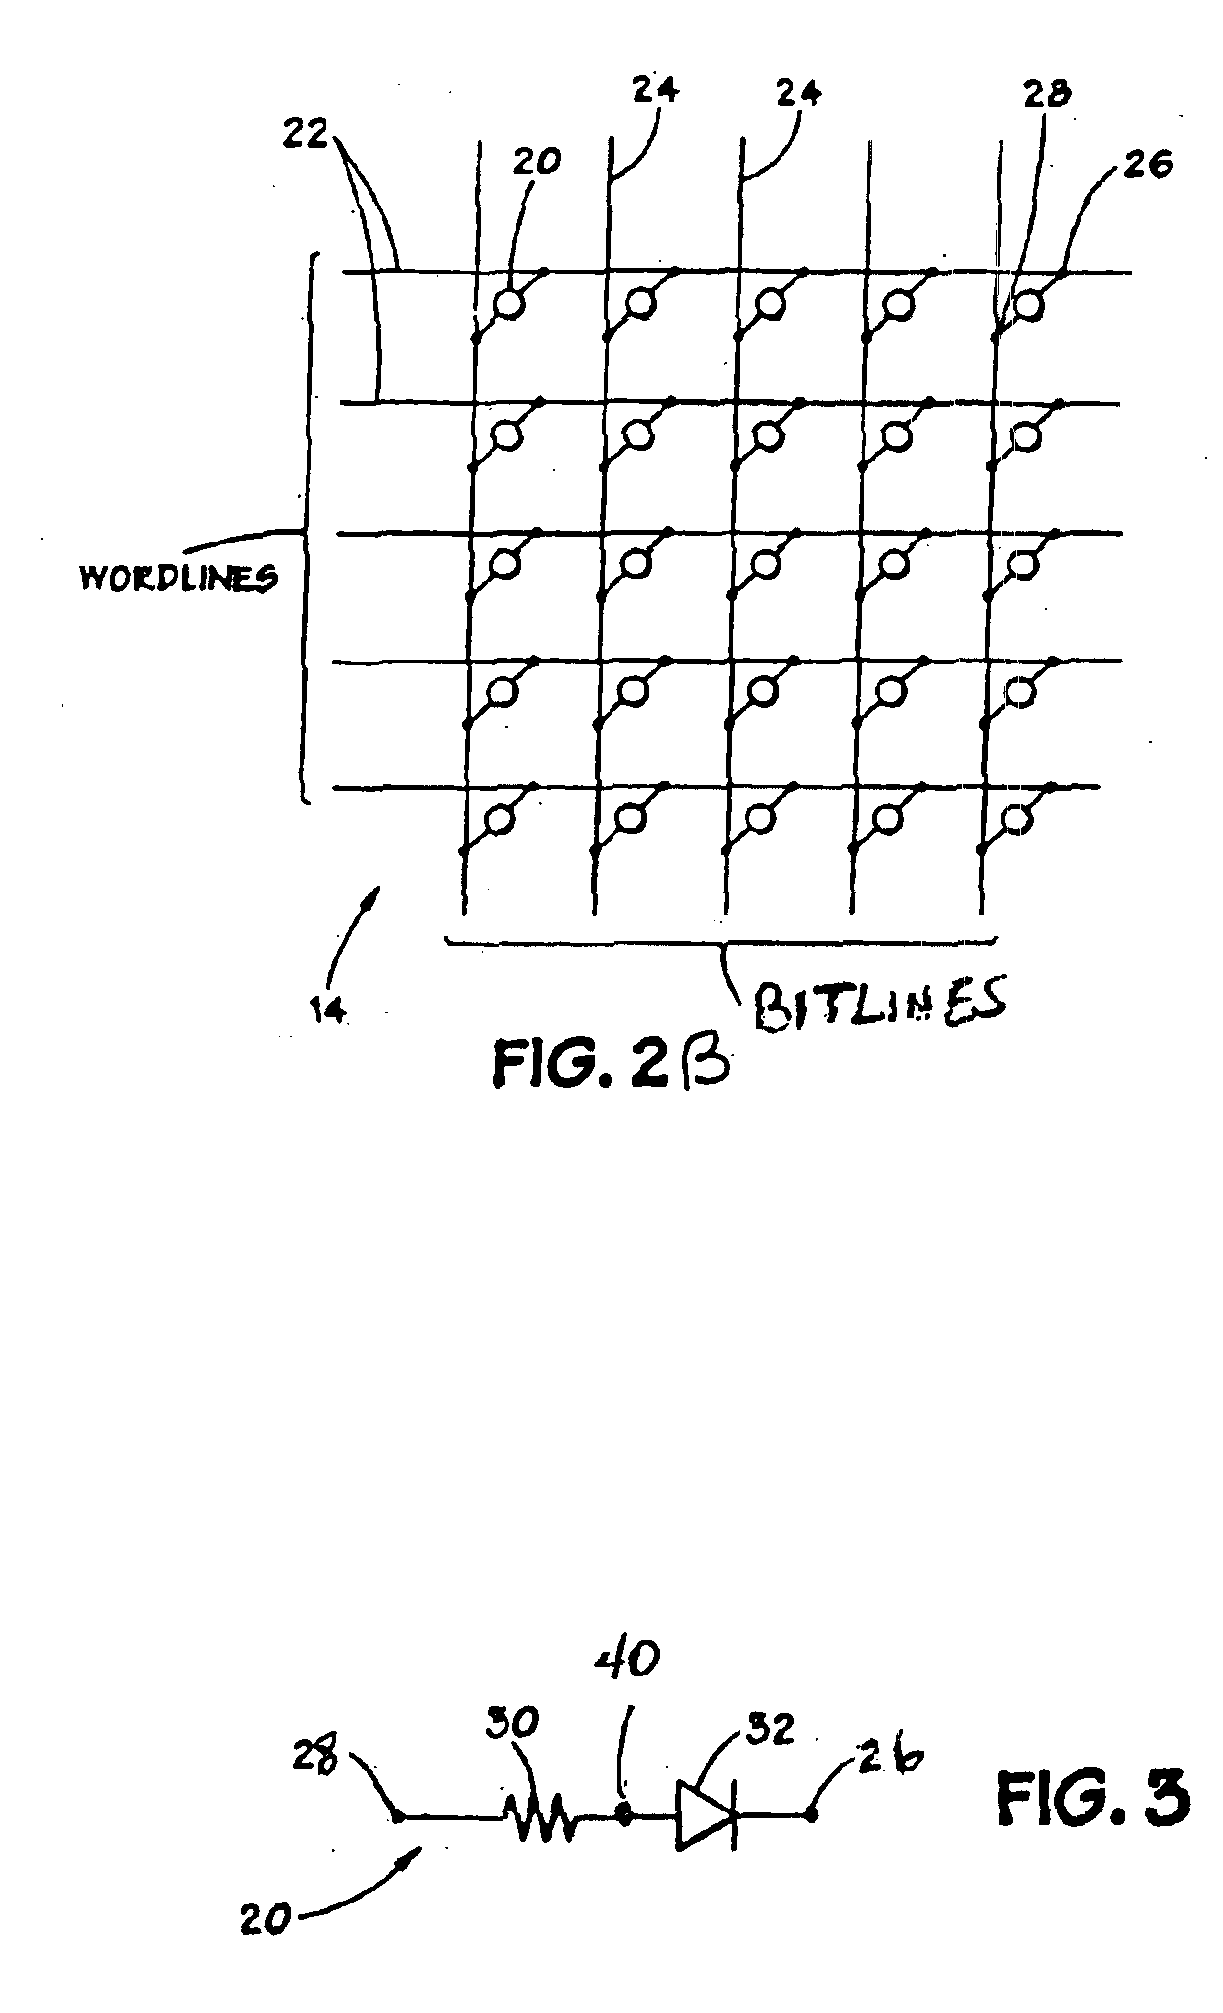 Programmable resistance memory element with layered memory material